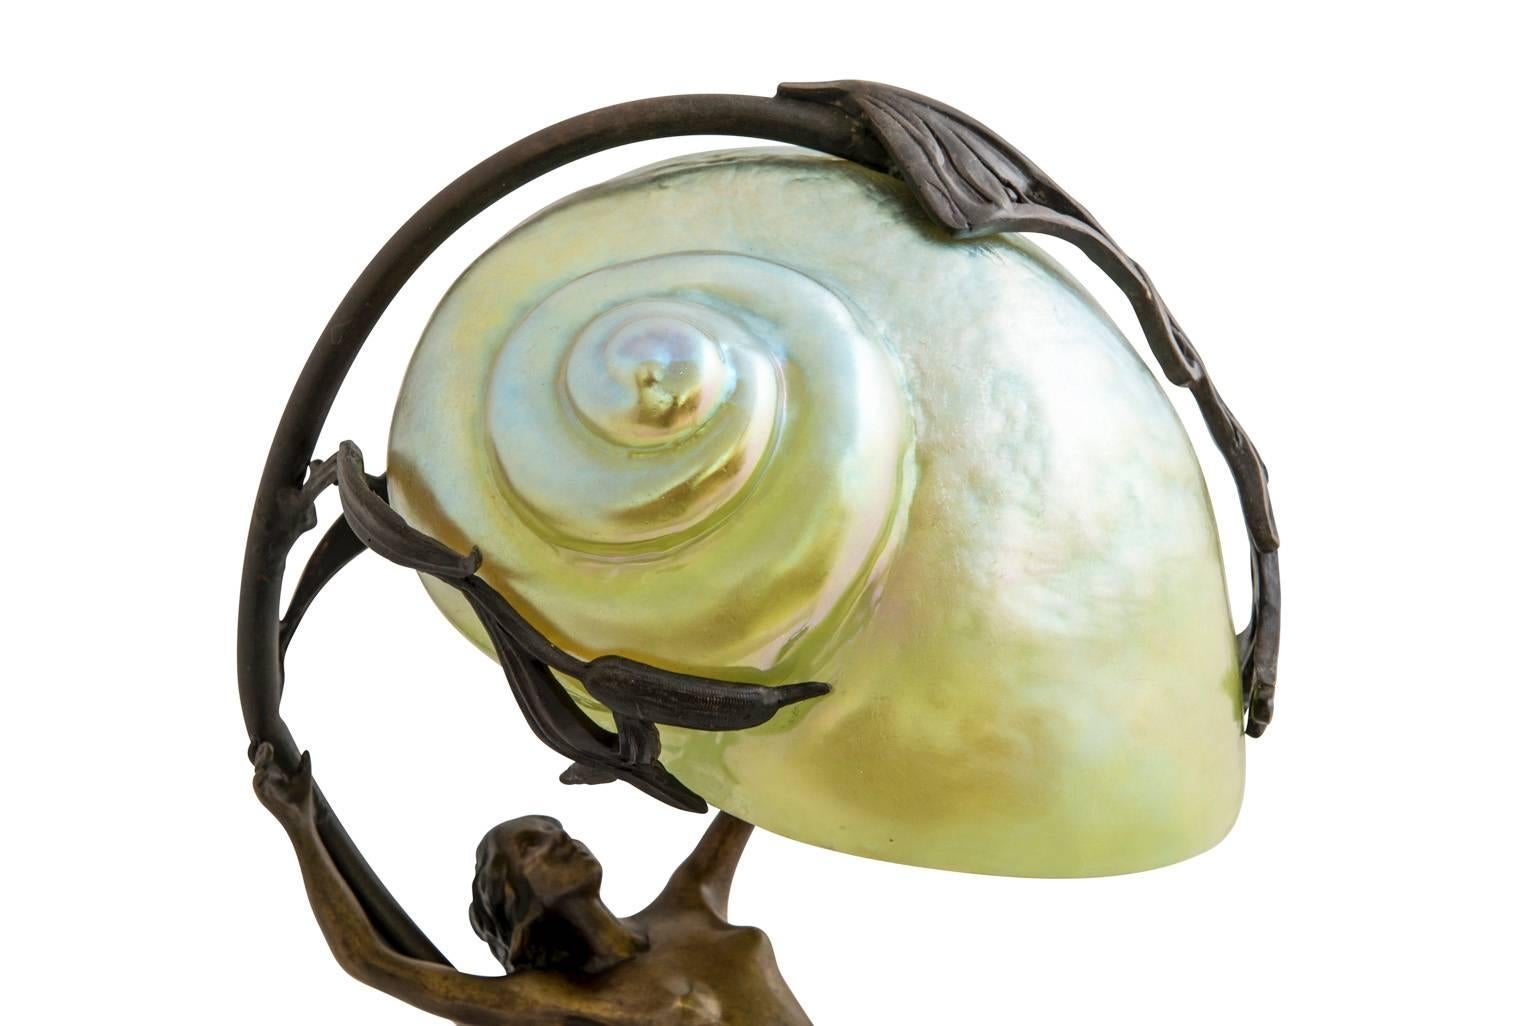 This lamp was produced after a design by Gustav Gurschner in the 1920s. There is a picture in the archives with the number GG-1900041 with different foot. A mermaid riding on a wave, carrying an iridescent glass shell above its head is a typical